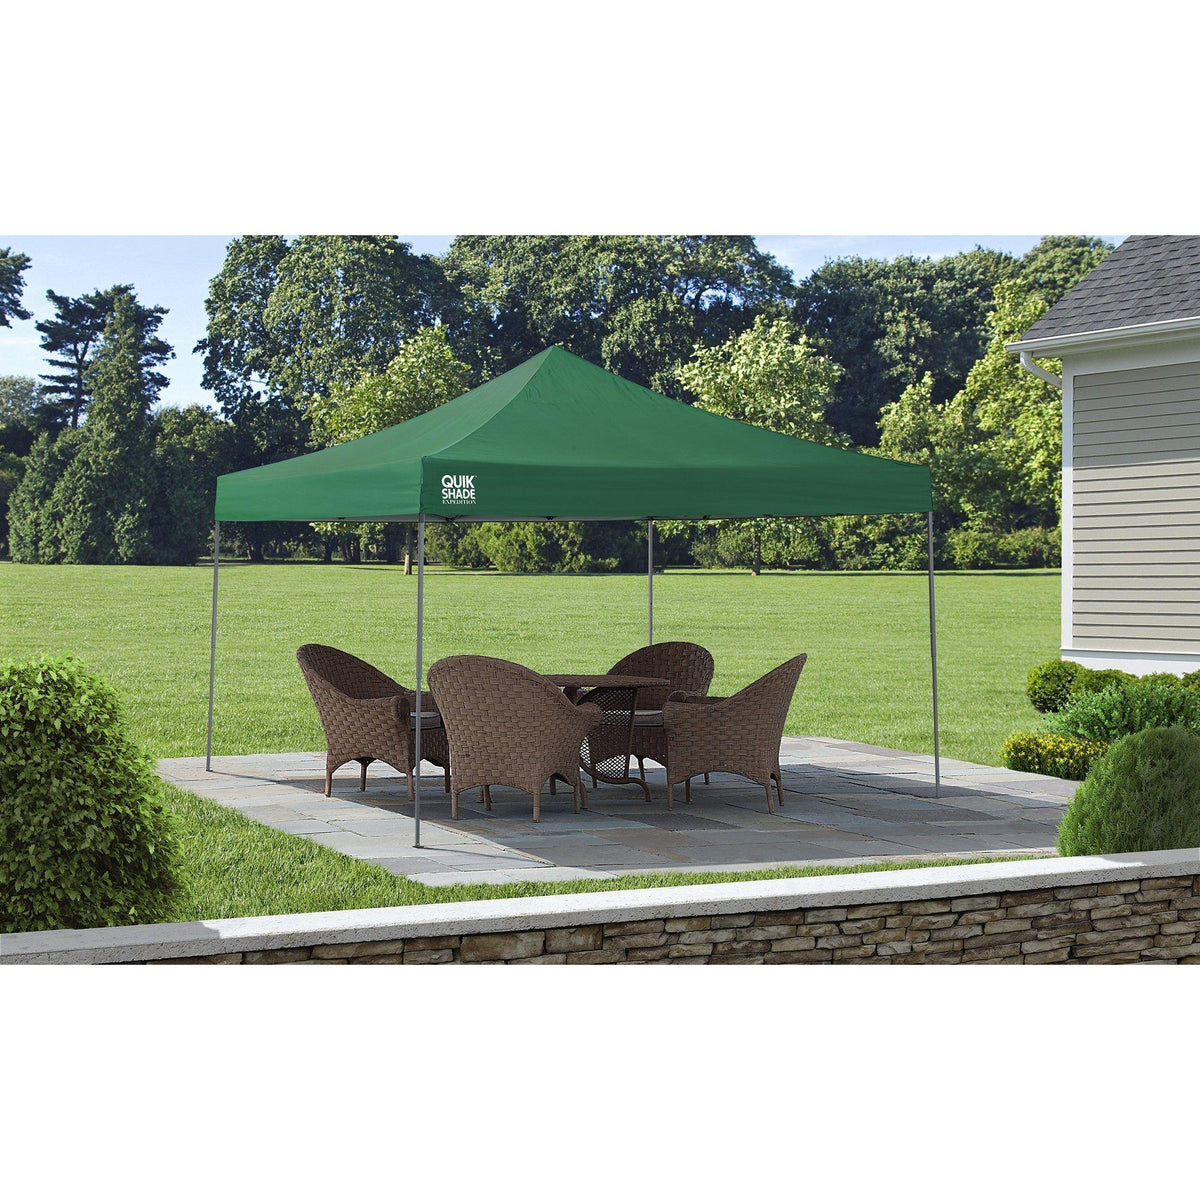 Quik Shade Expedition 12 x 12 ft. Straight Leg Canopy, Green